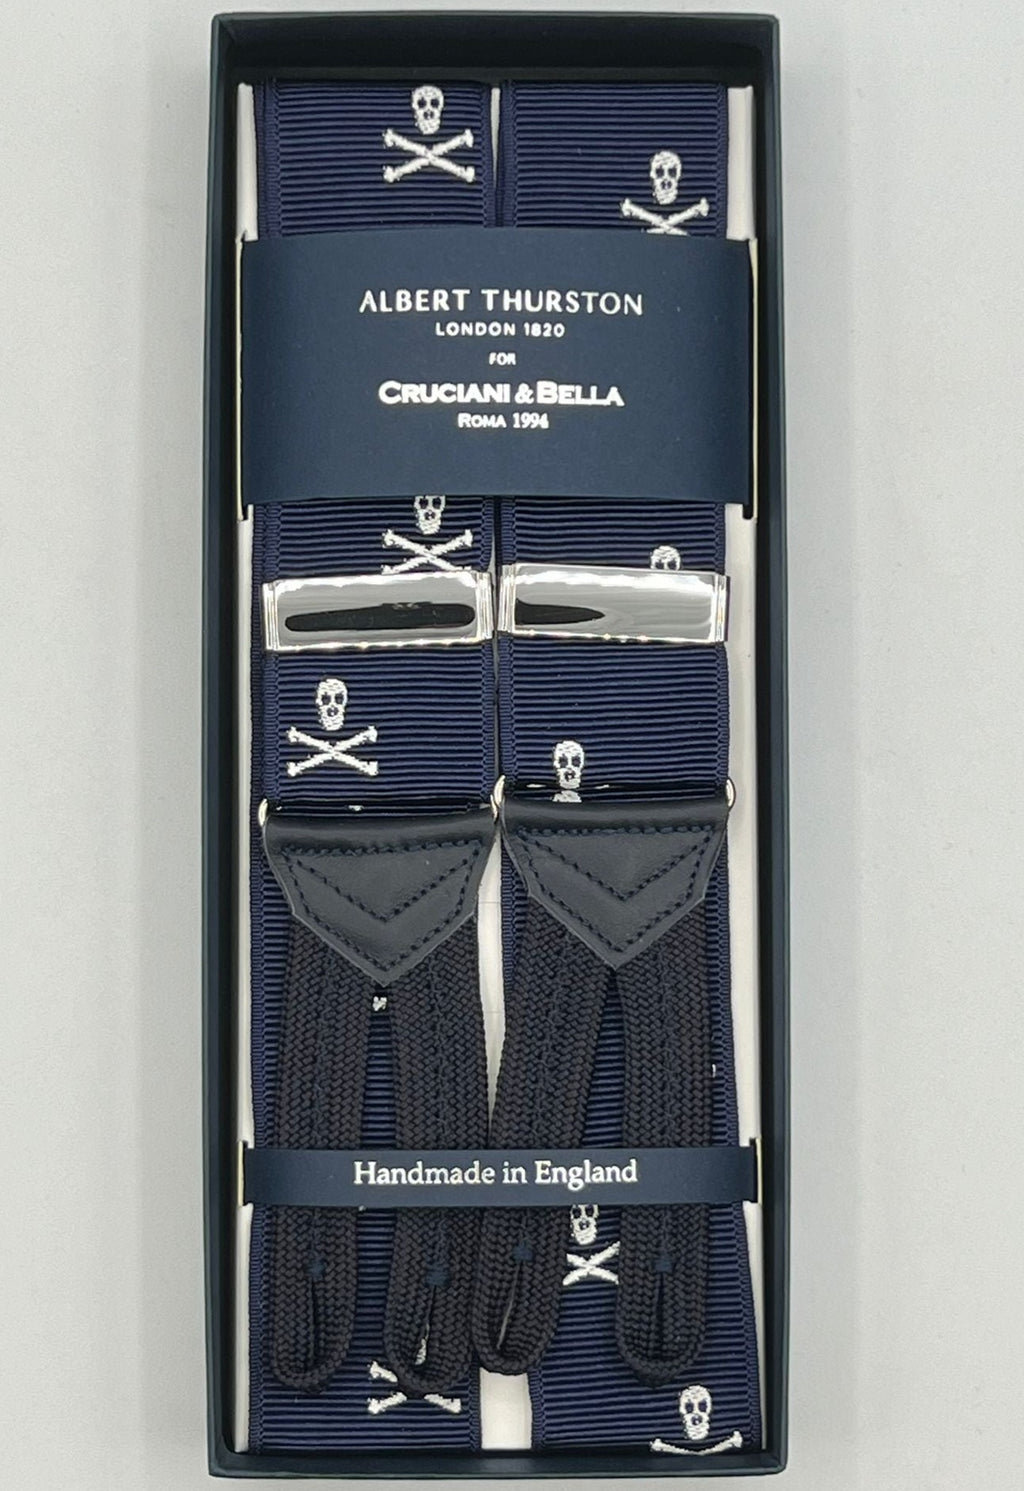 Albert Thurston for Cruciani & Bella Made in England Adjustable Sizing 40 mm Woven Barathea  Blue and White Skulls Motif Braces Braid ends Y-Shaped Nickel Fittings Size. MULTIFIT